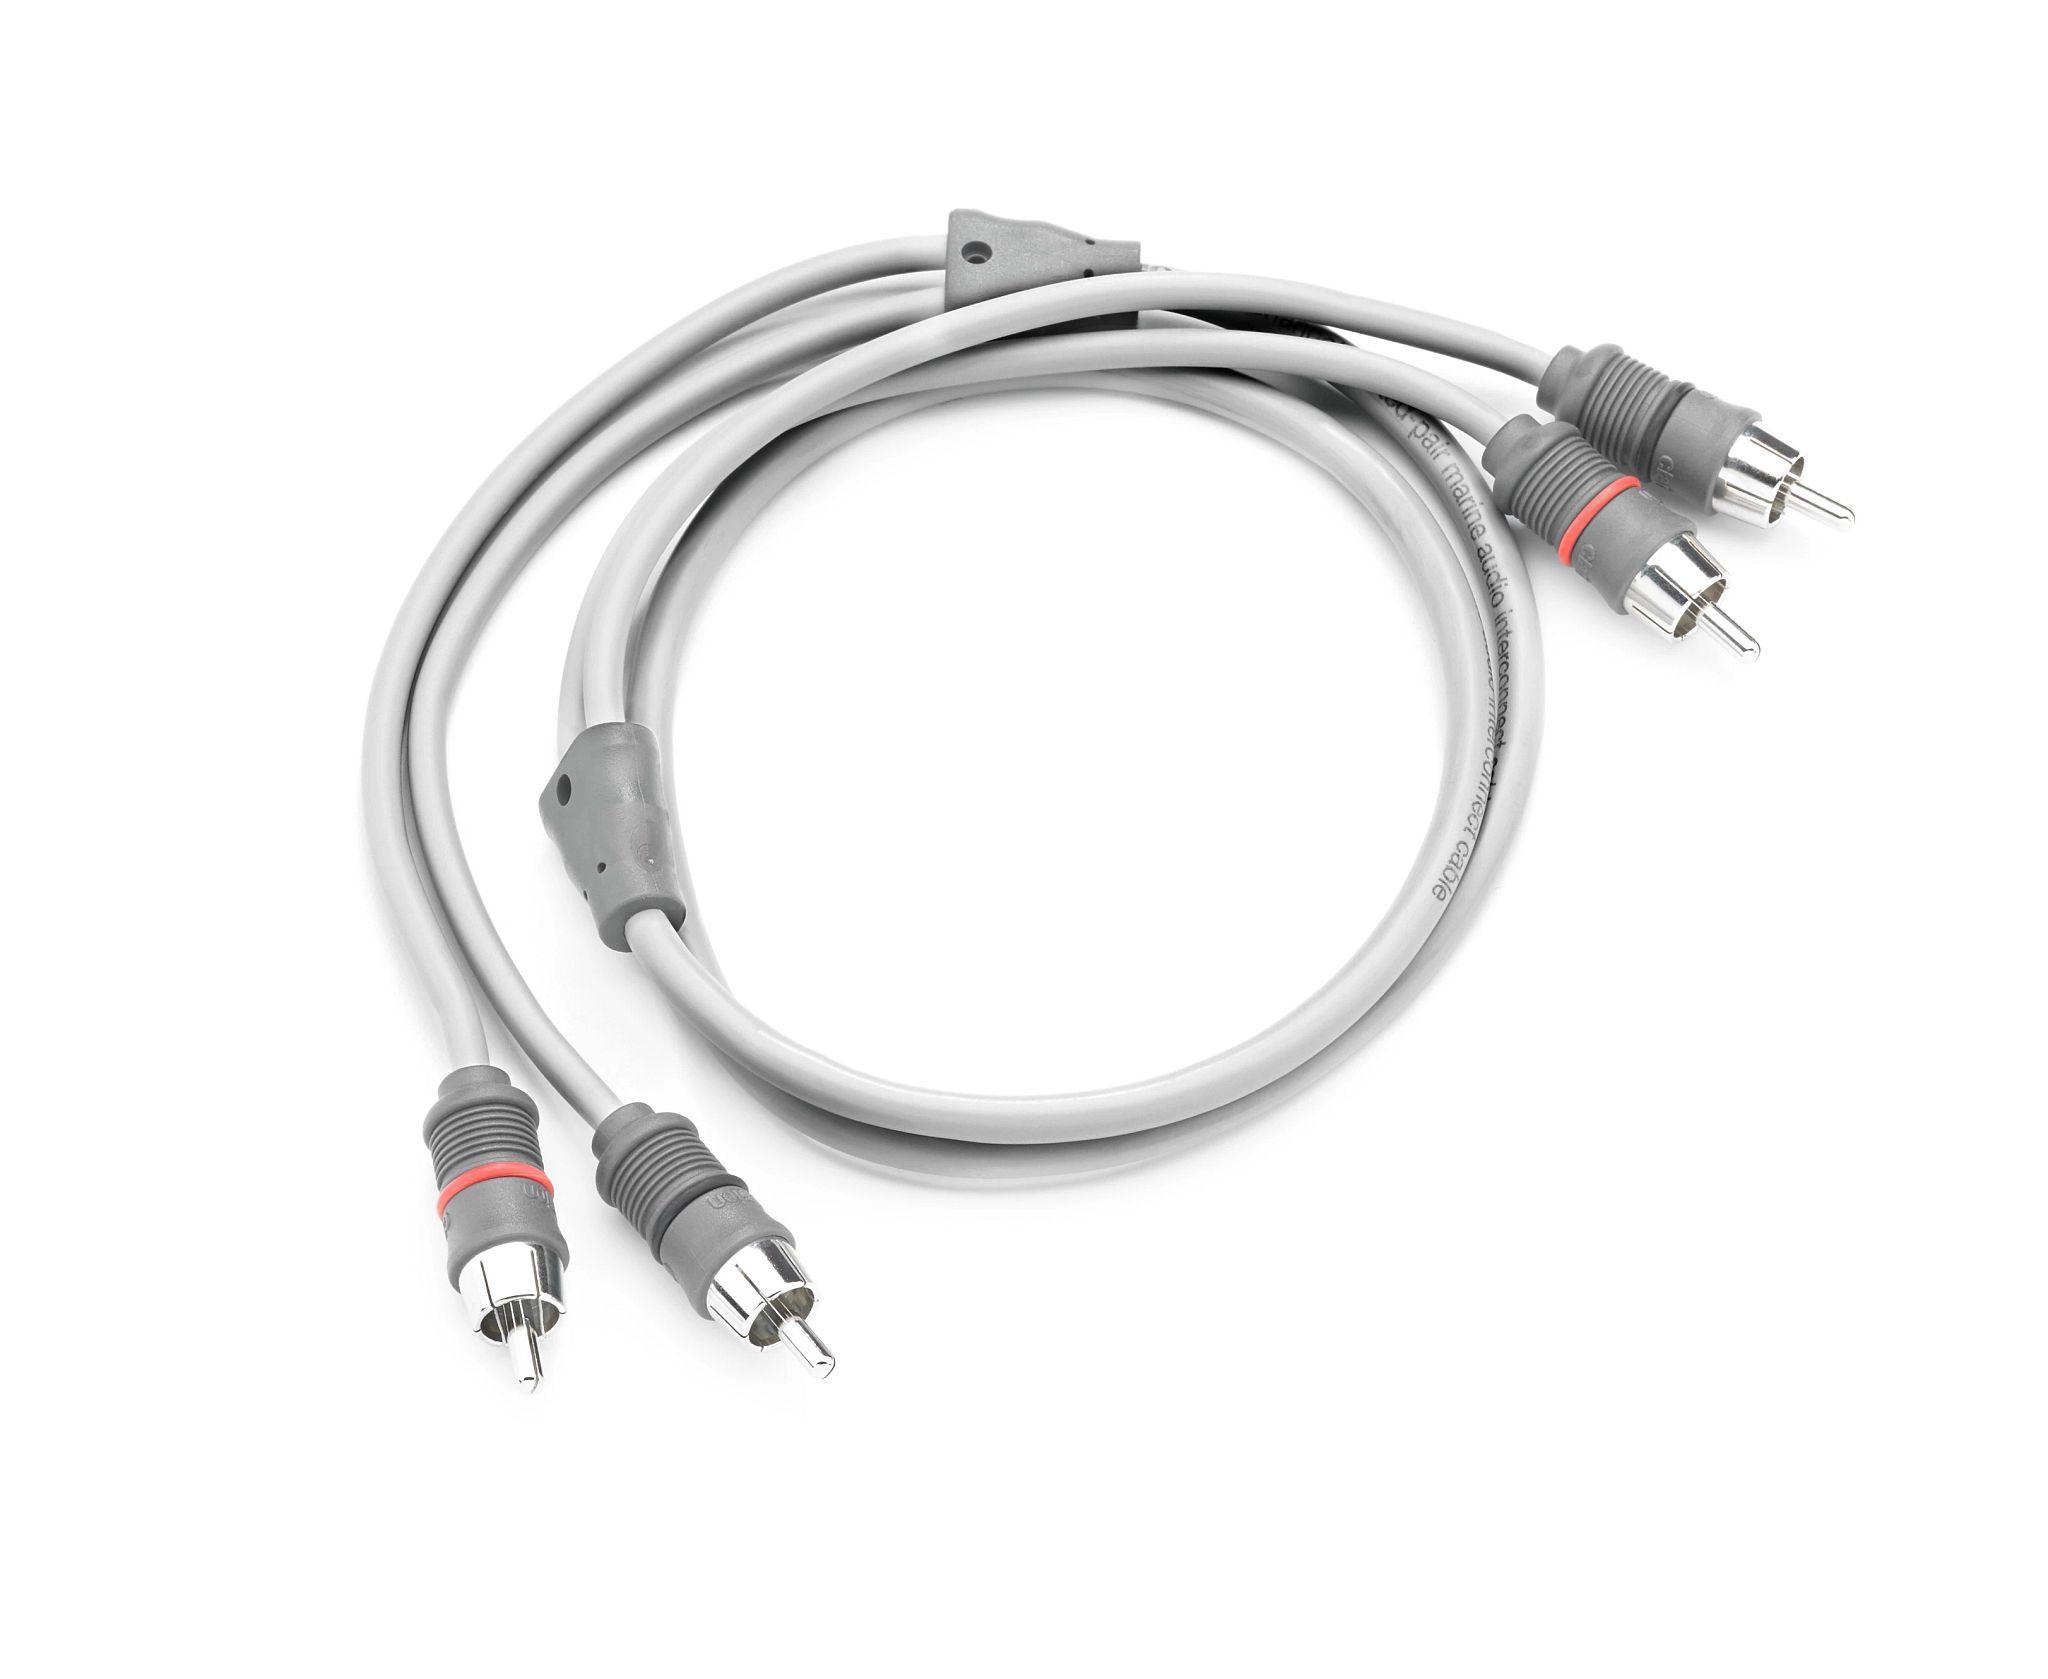 CLARION 2-ch Twisted-Pair Marine Audio Interconnect w/ Molded Connectors – 3 ft. / 0.91 m | 92796